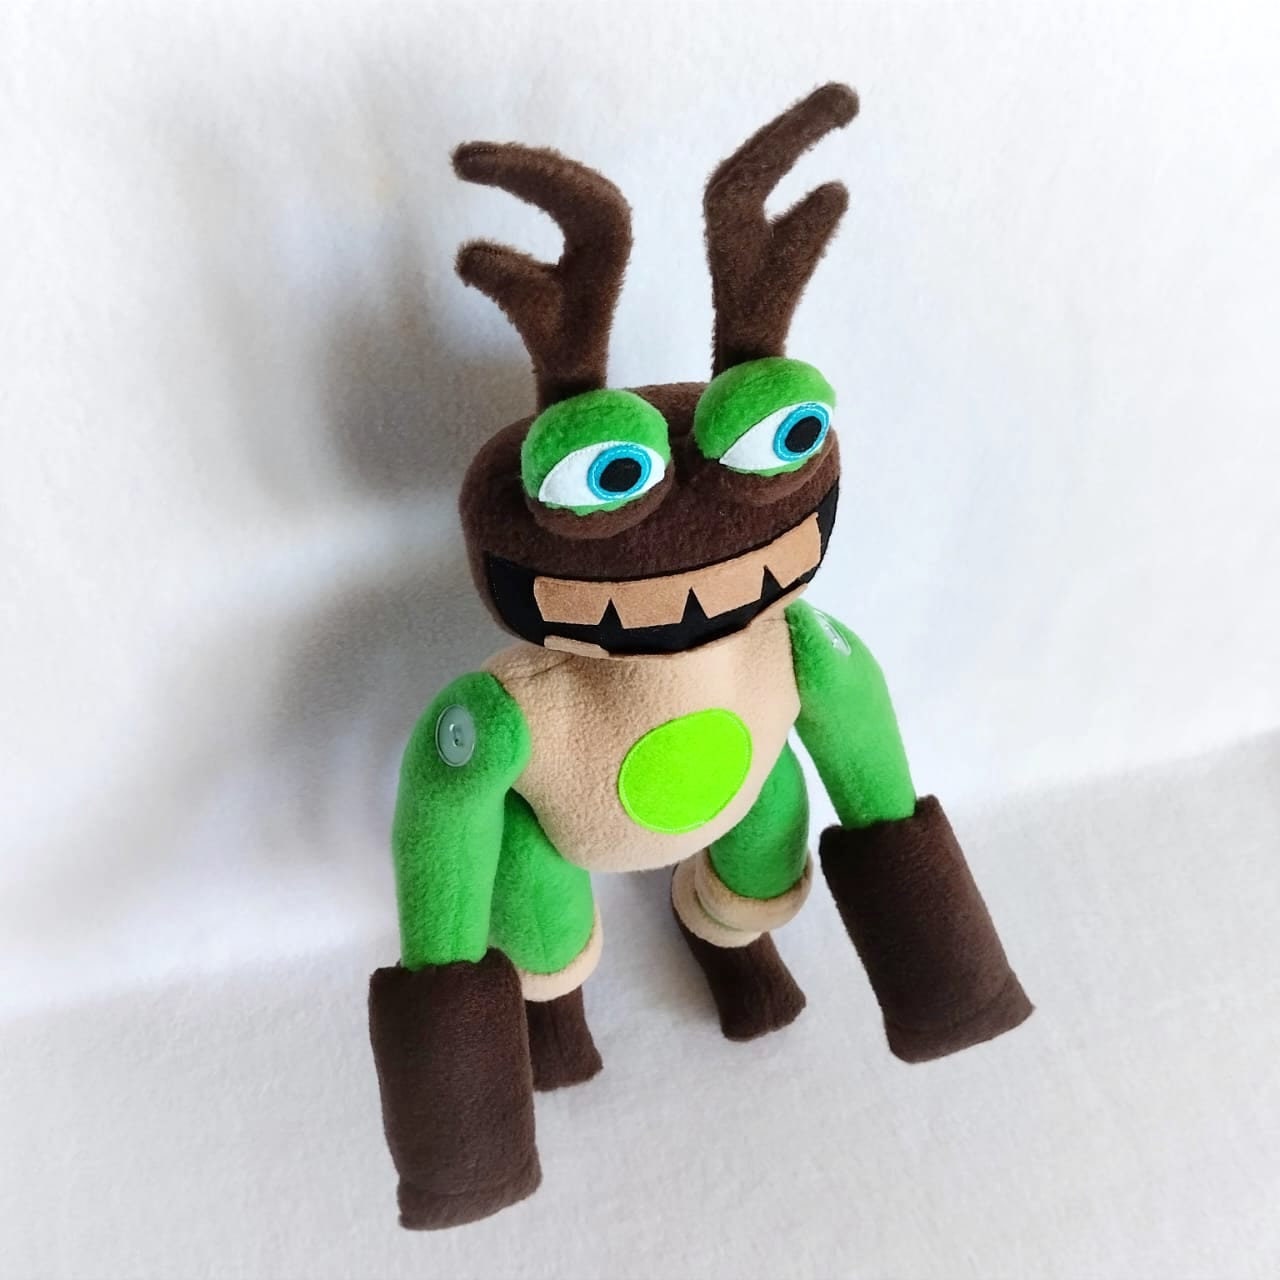 MR PLANT PLUSHIE NOW AVAILABLE FROM MAKESHIP! Music: @loyer.music  #weirdcore #dreamcore #worldofmrplant